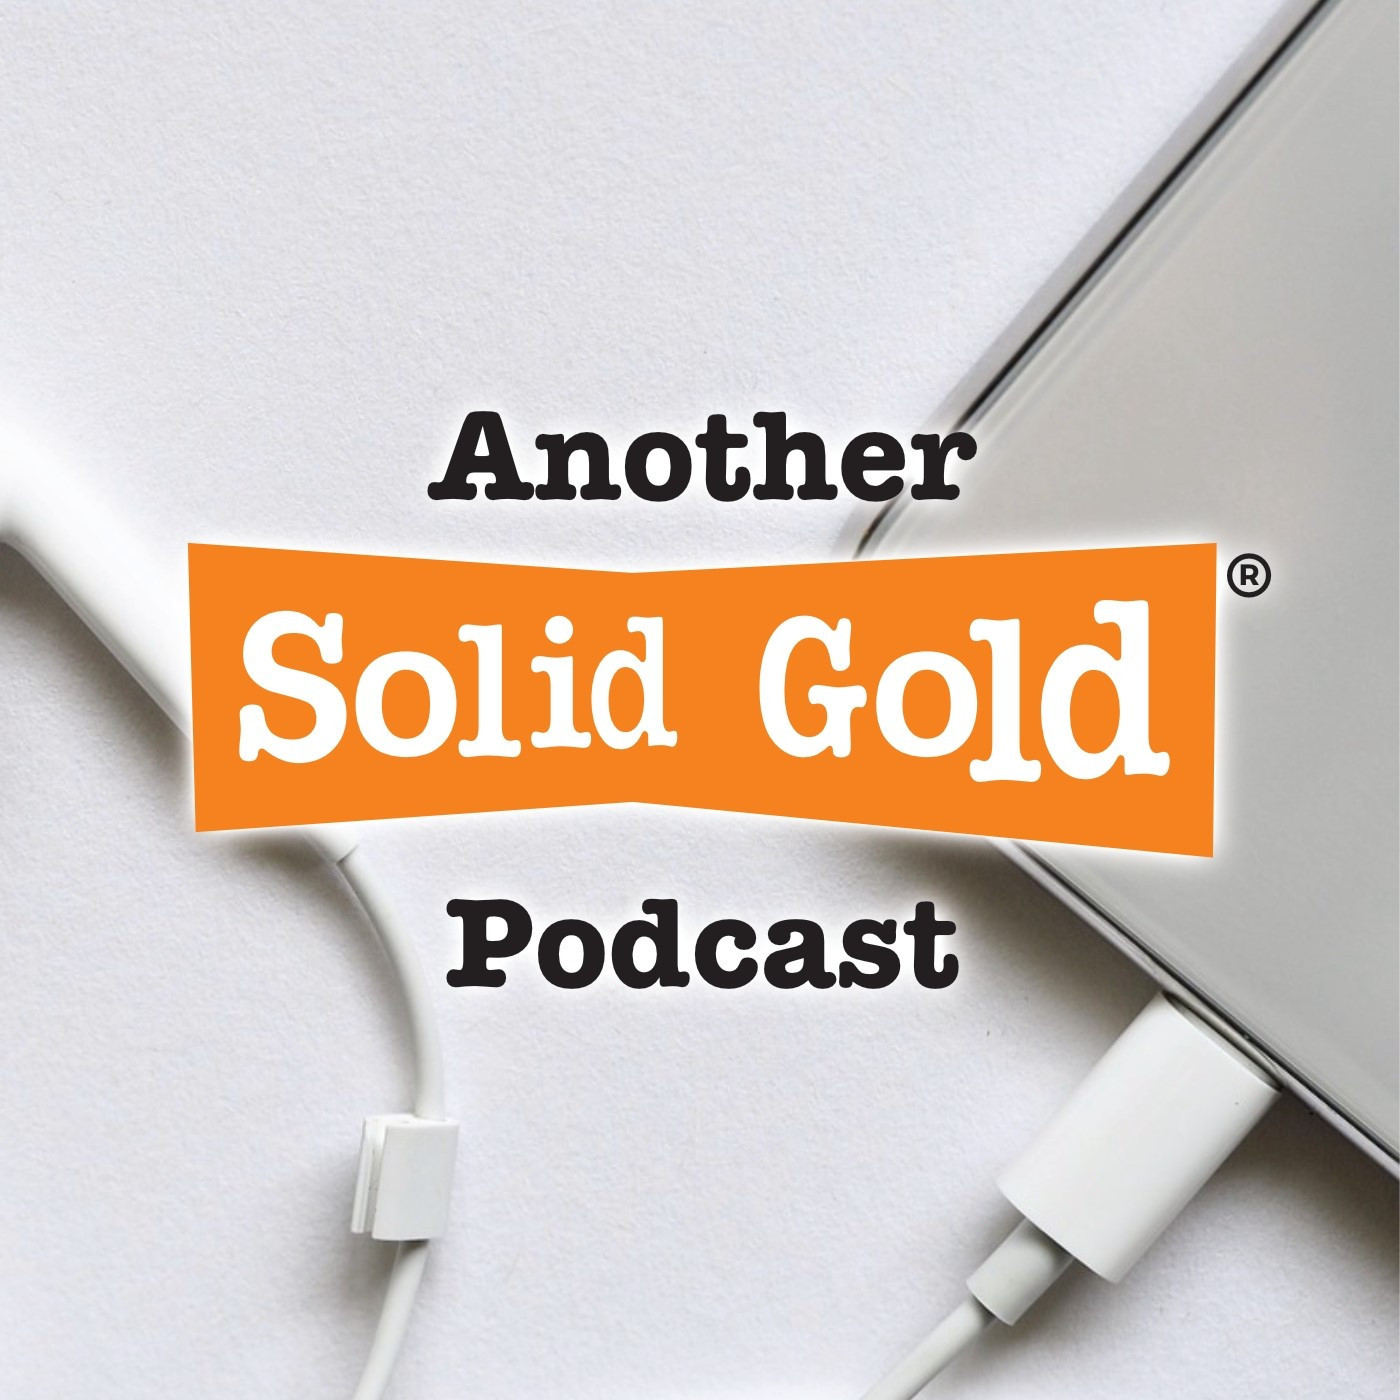 Solid Gold Podcasts - Demos, Samples, Trailers and Others